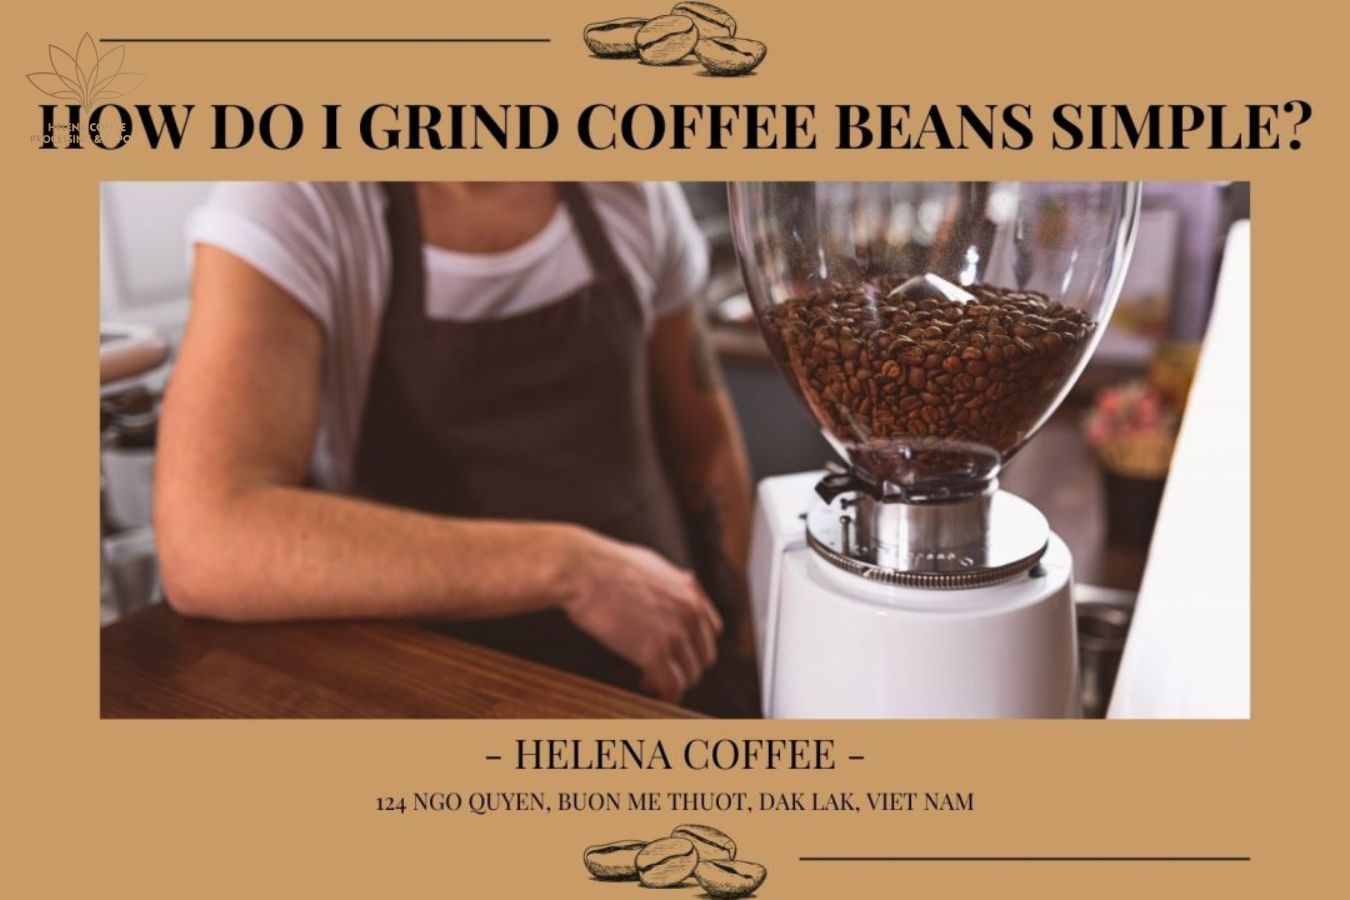 How Do I Grind Coffee Beans Simple?